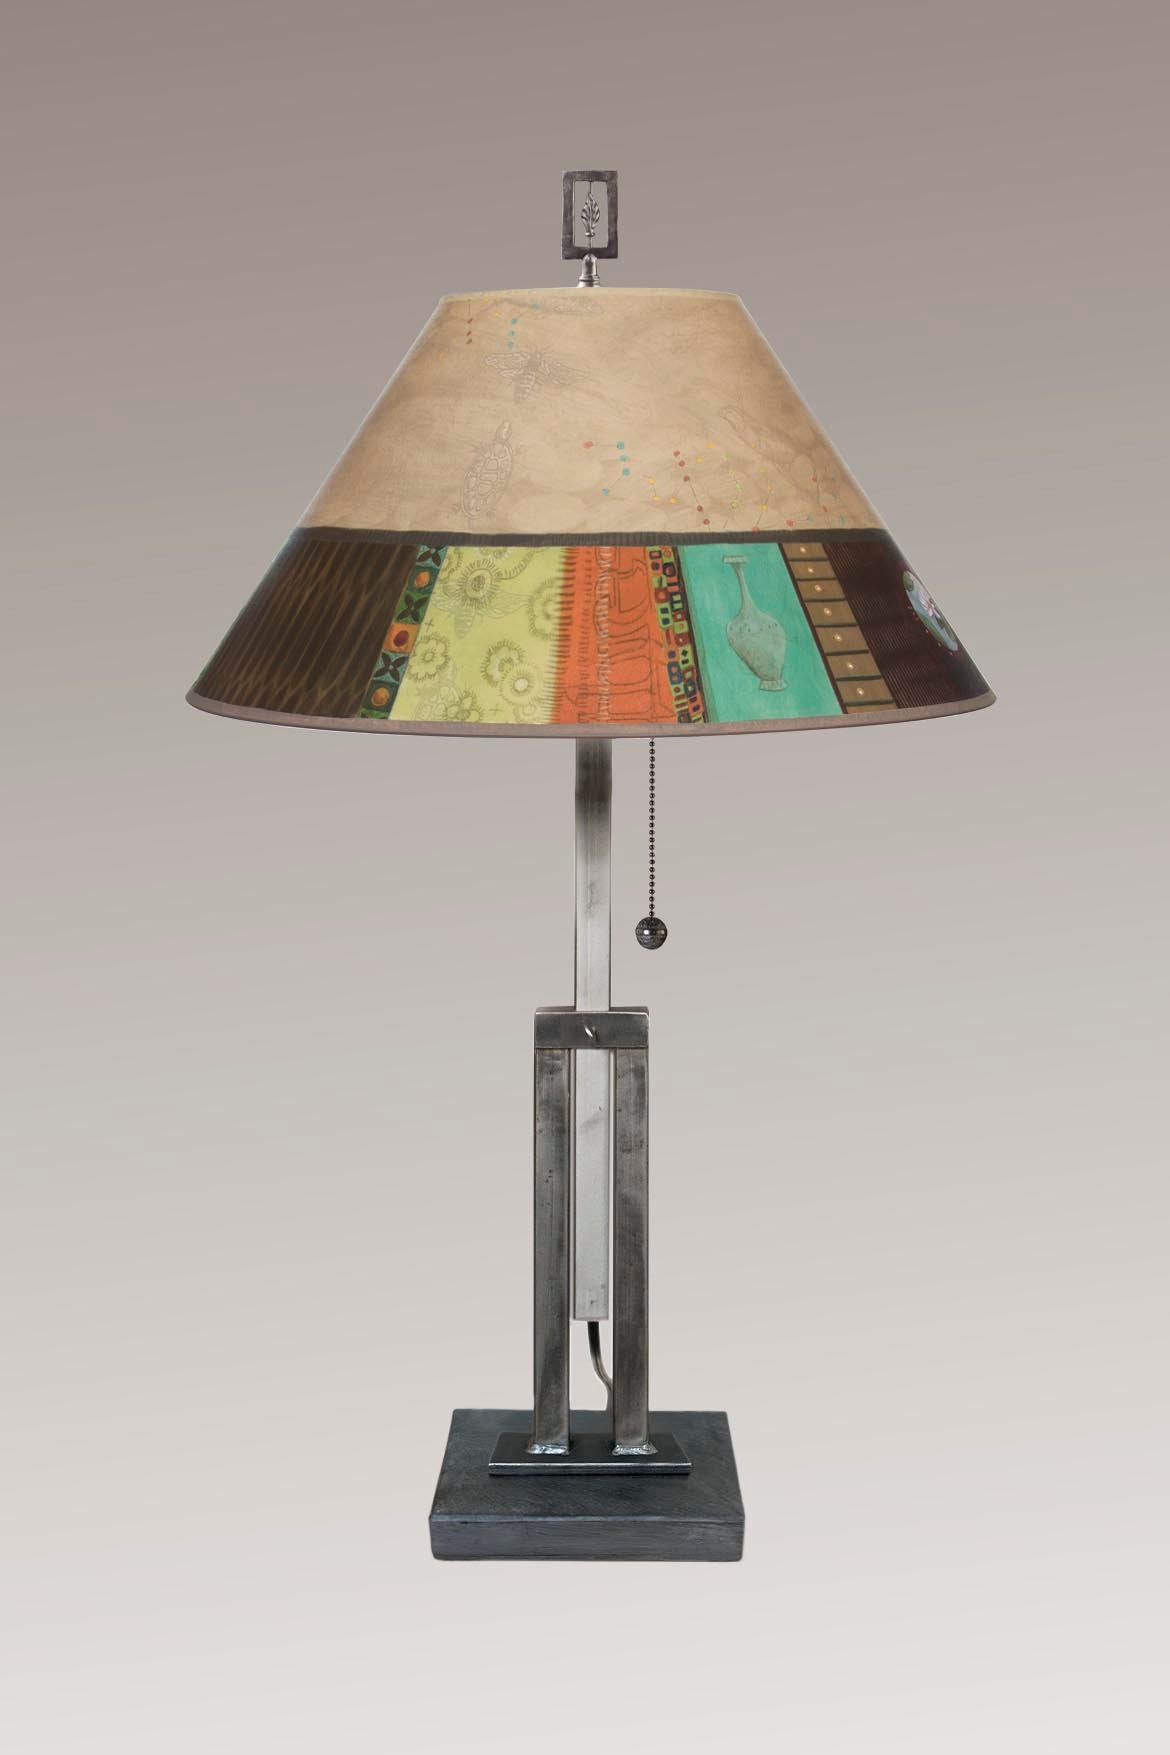 Janna Ugone & Co Table Lamp Adjustable-Height Steel Table Lamp with Large Drum Shade in Linen Match